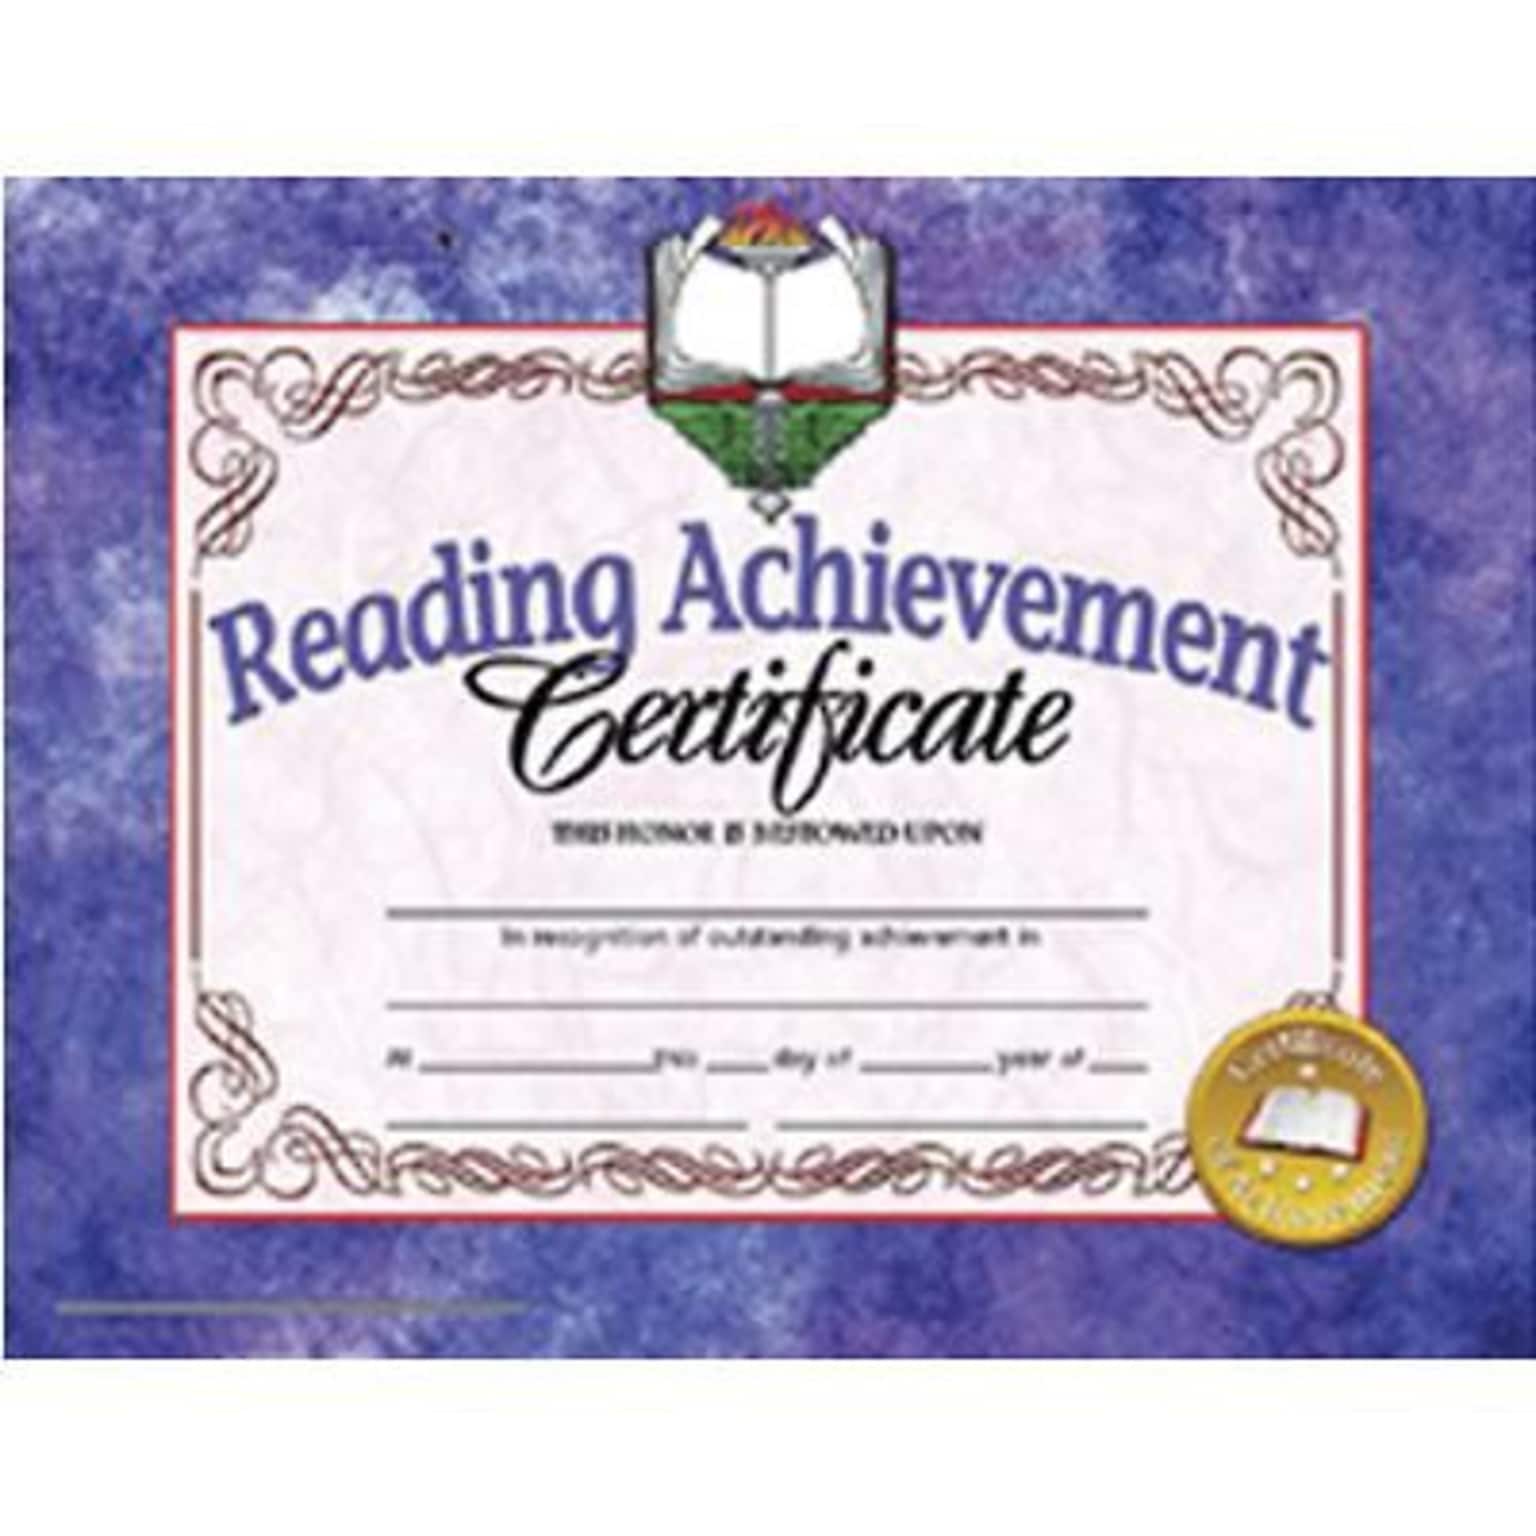 Hayes Reading Achievement Certificate, 8.5 x 11, Pack of 30 (H-VA677)